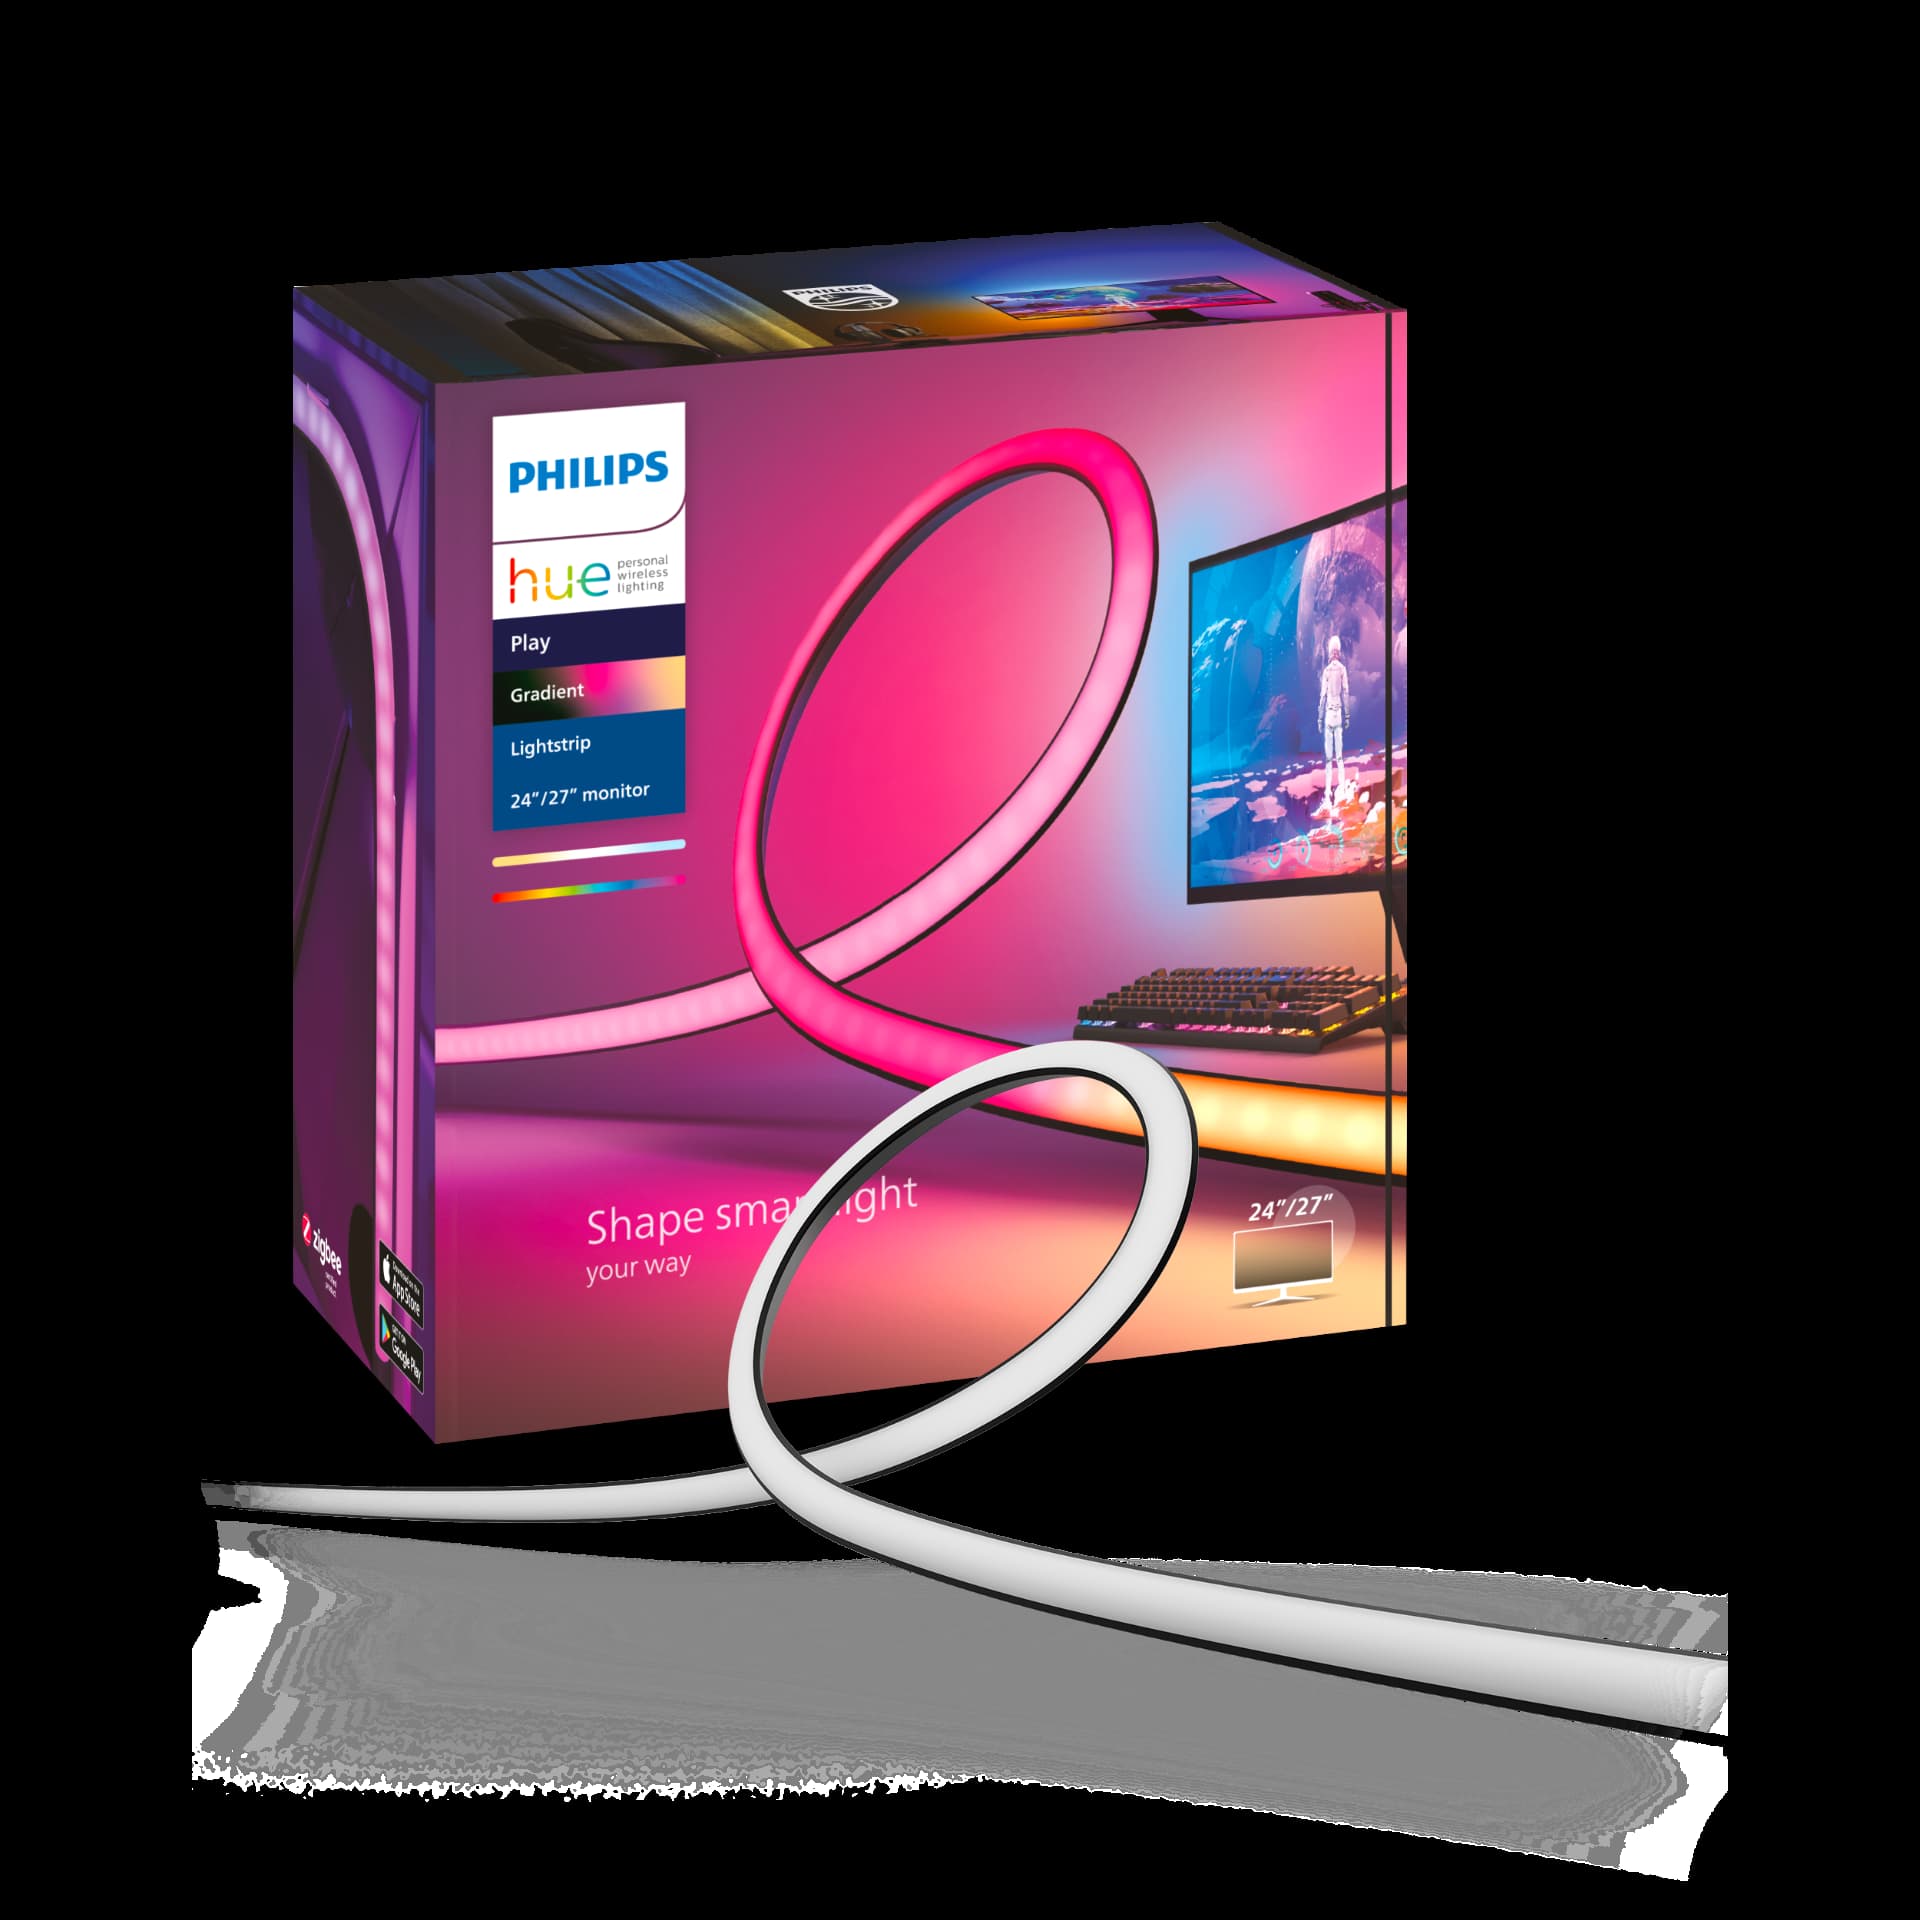 Philips Hue Play gradient Lightstrip for PC – product (1)-sm